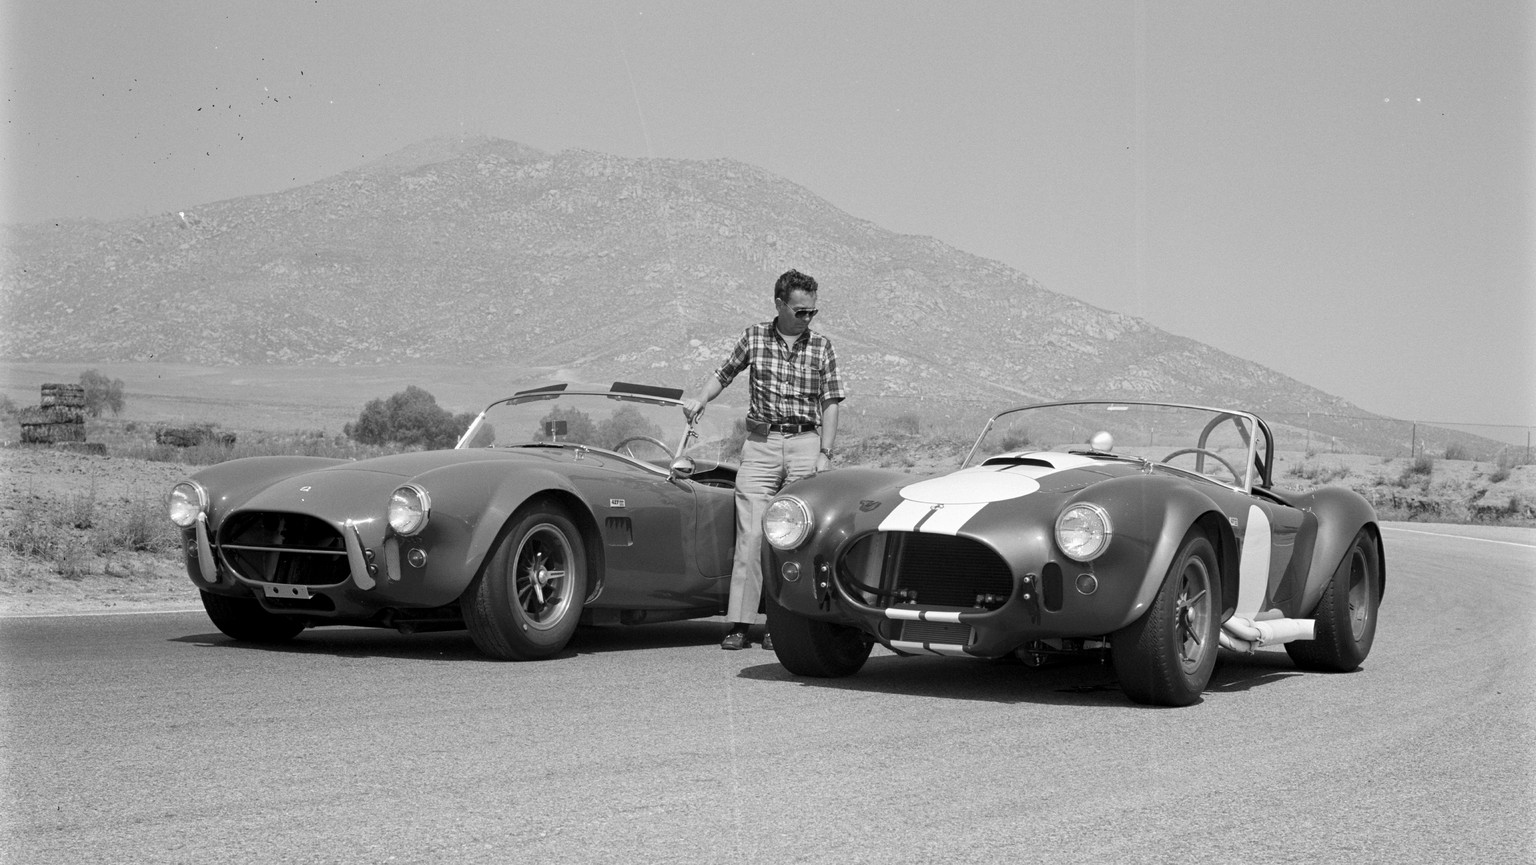 UNITED STATES - SEPTEMBER 09: Shelby 427 Cobras - Street - Road Racing. Two Shelby Cobras equipped with 427 Ford engines, one for the street and the other for competition, were tested at Riverside Int ...